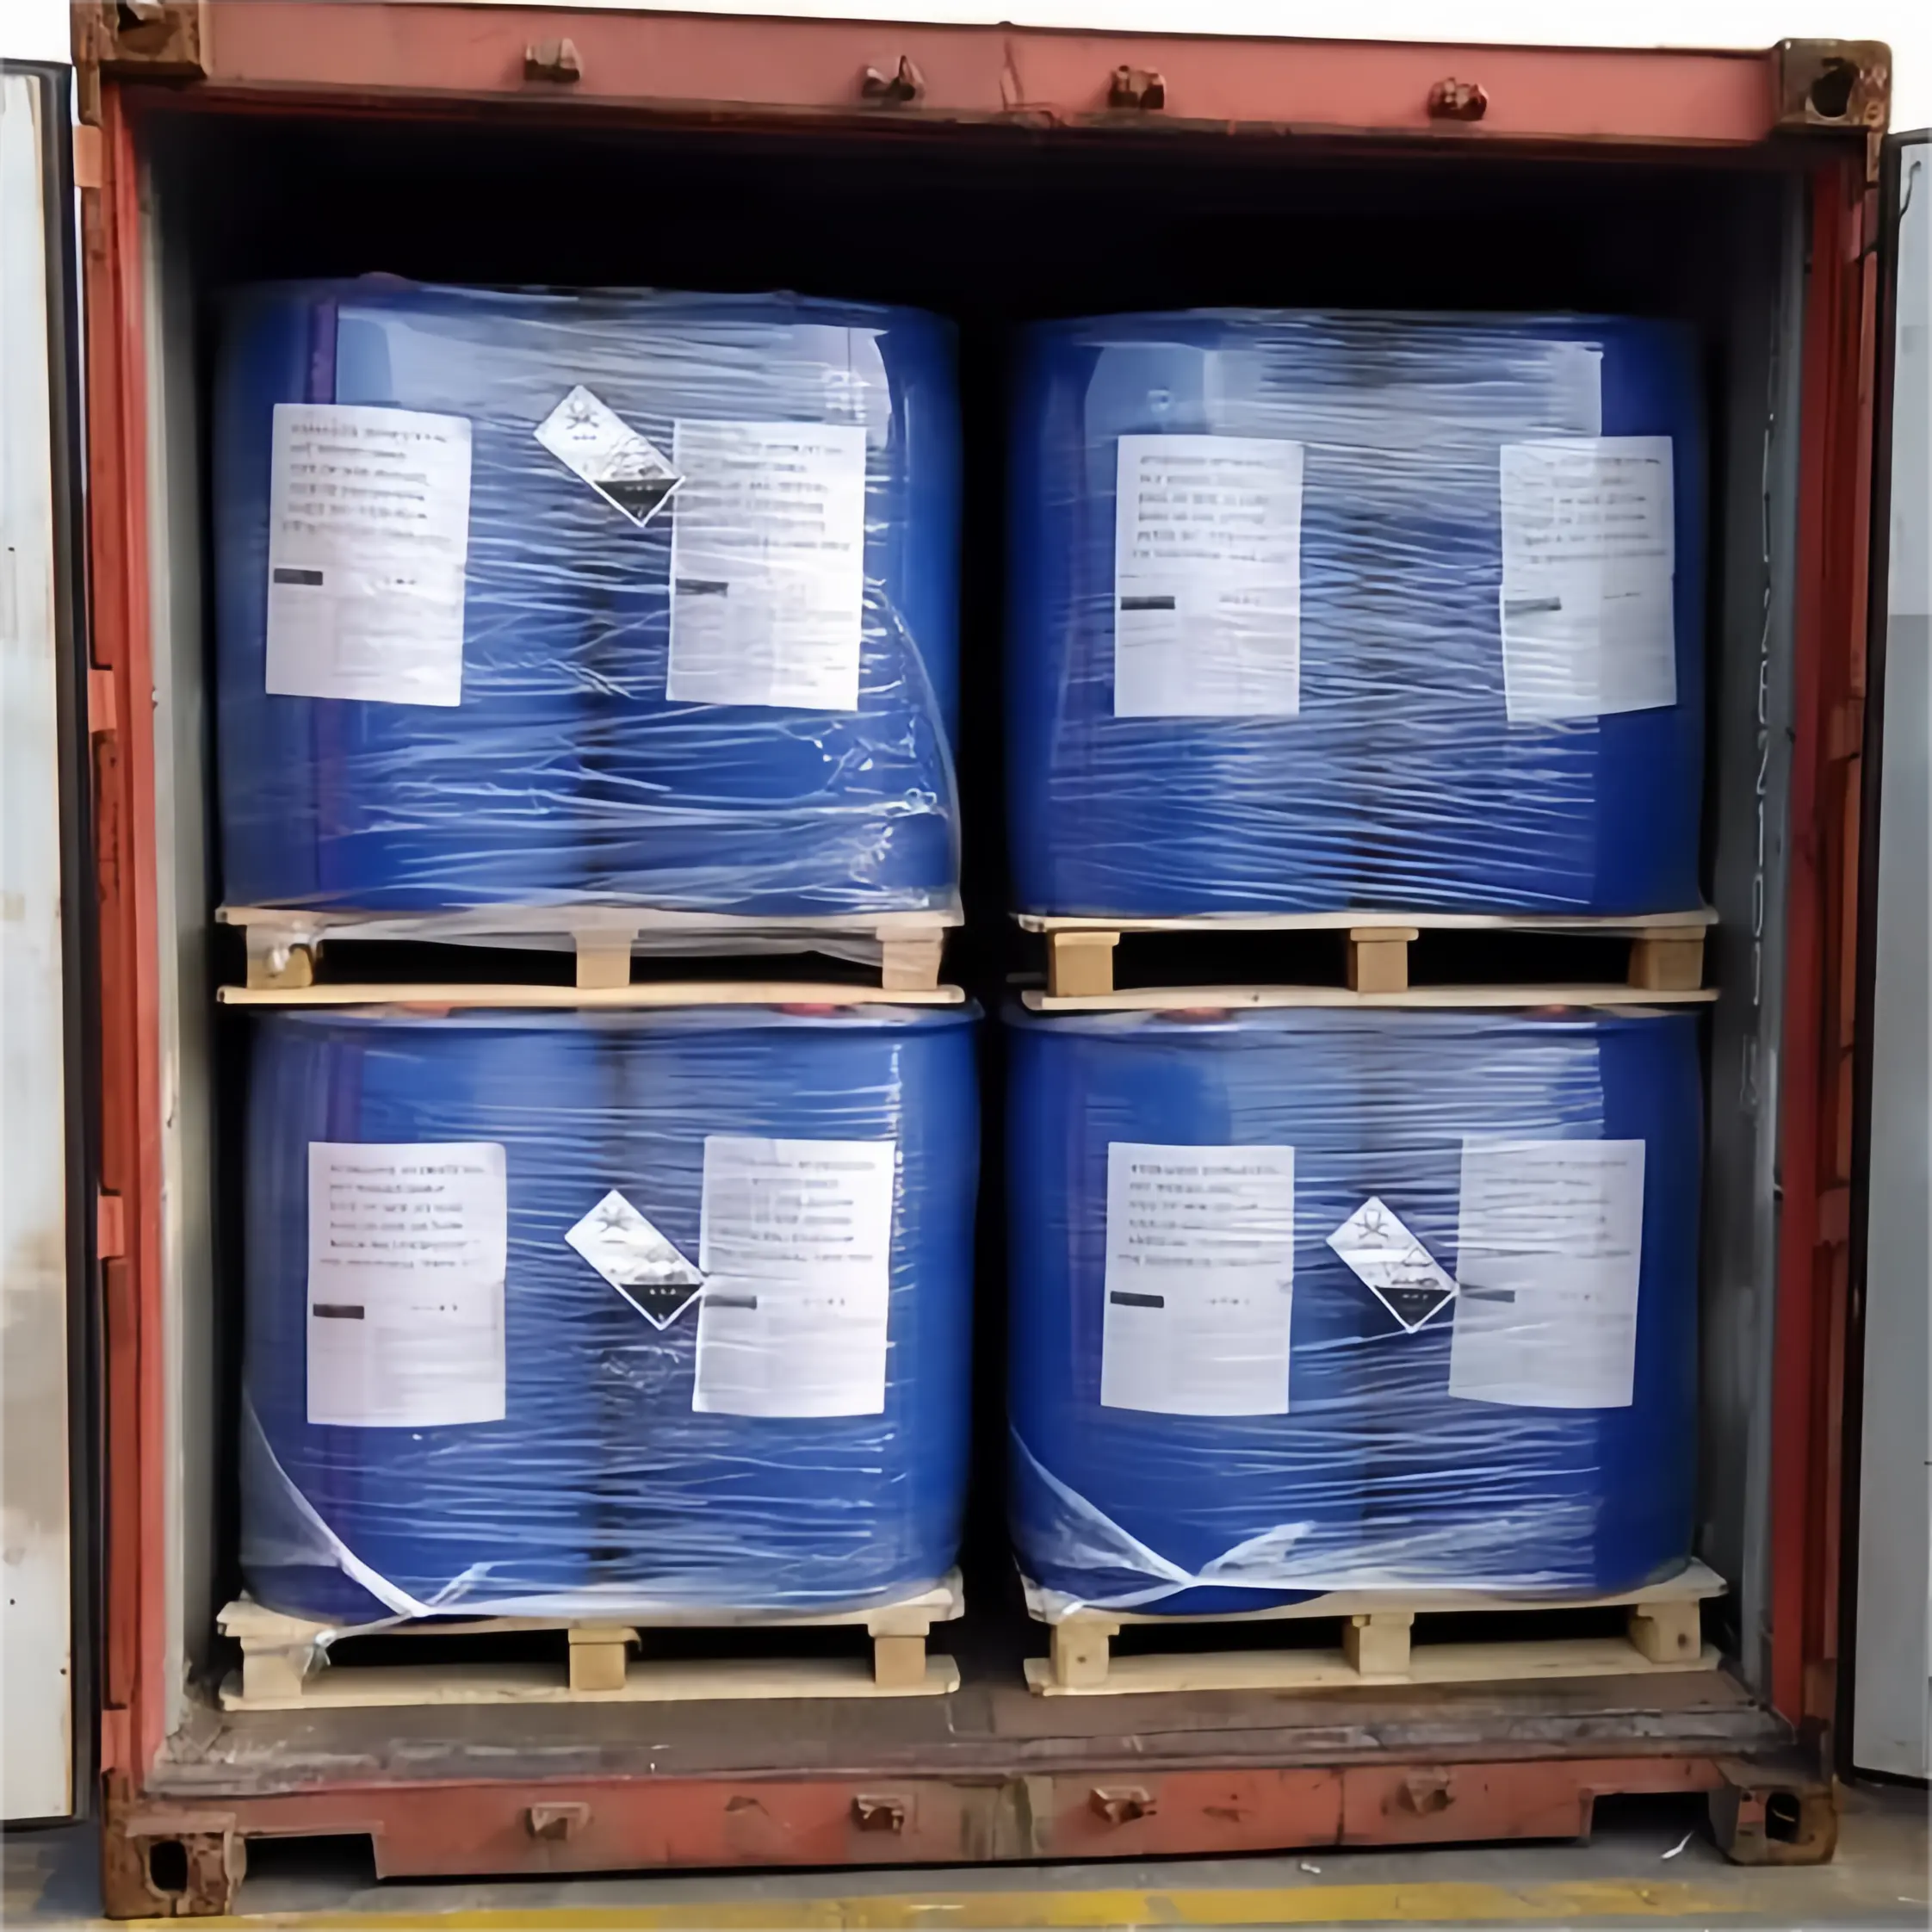 CAS:7803-57-8/302-01-2 High Quality Hydrazine Hydrate HH 100% For Water Treatment